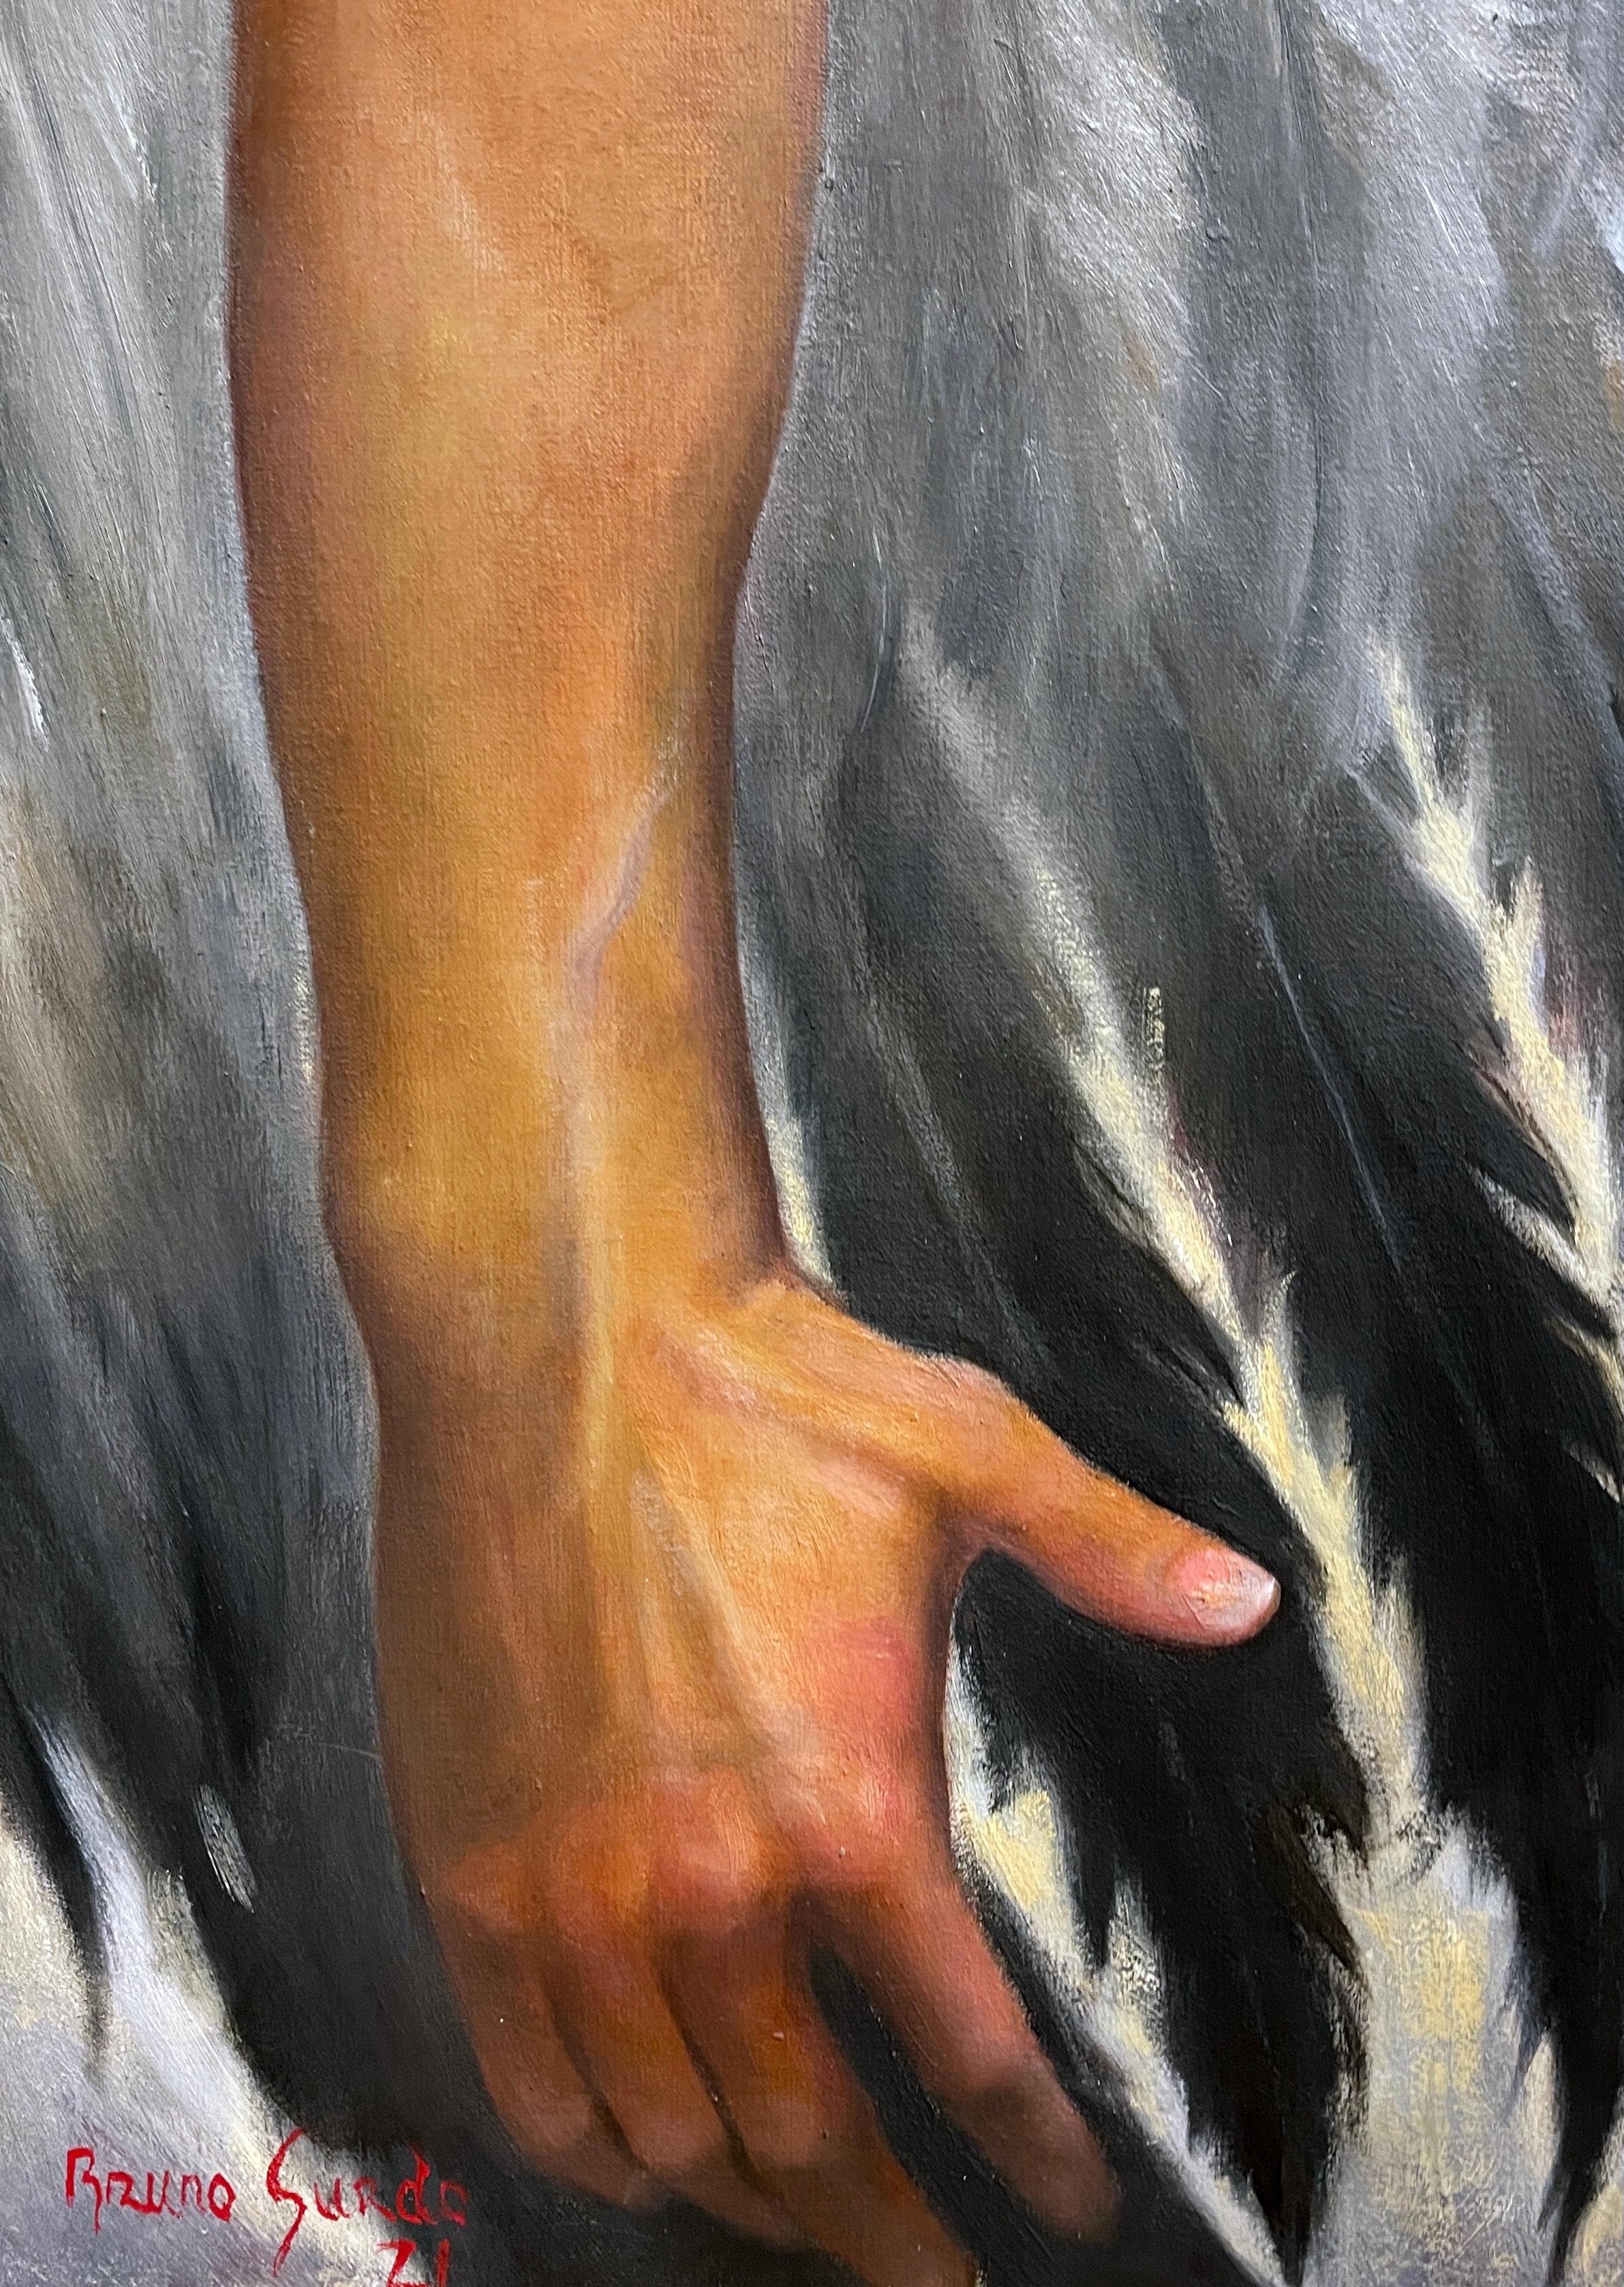 Fallen Angel - Blond, Bare Chested Winged Male, Contemporary Oil Painting  - Black Figurative Painting by Bruno Surdo